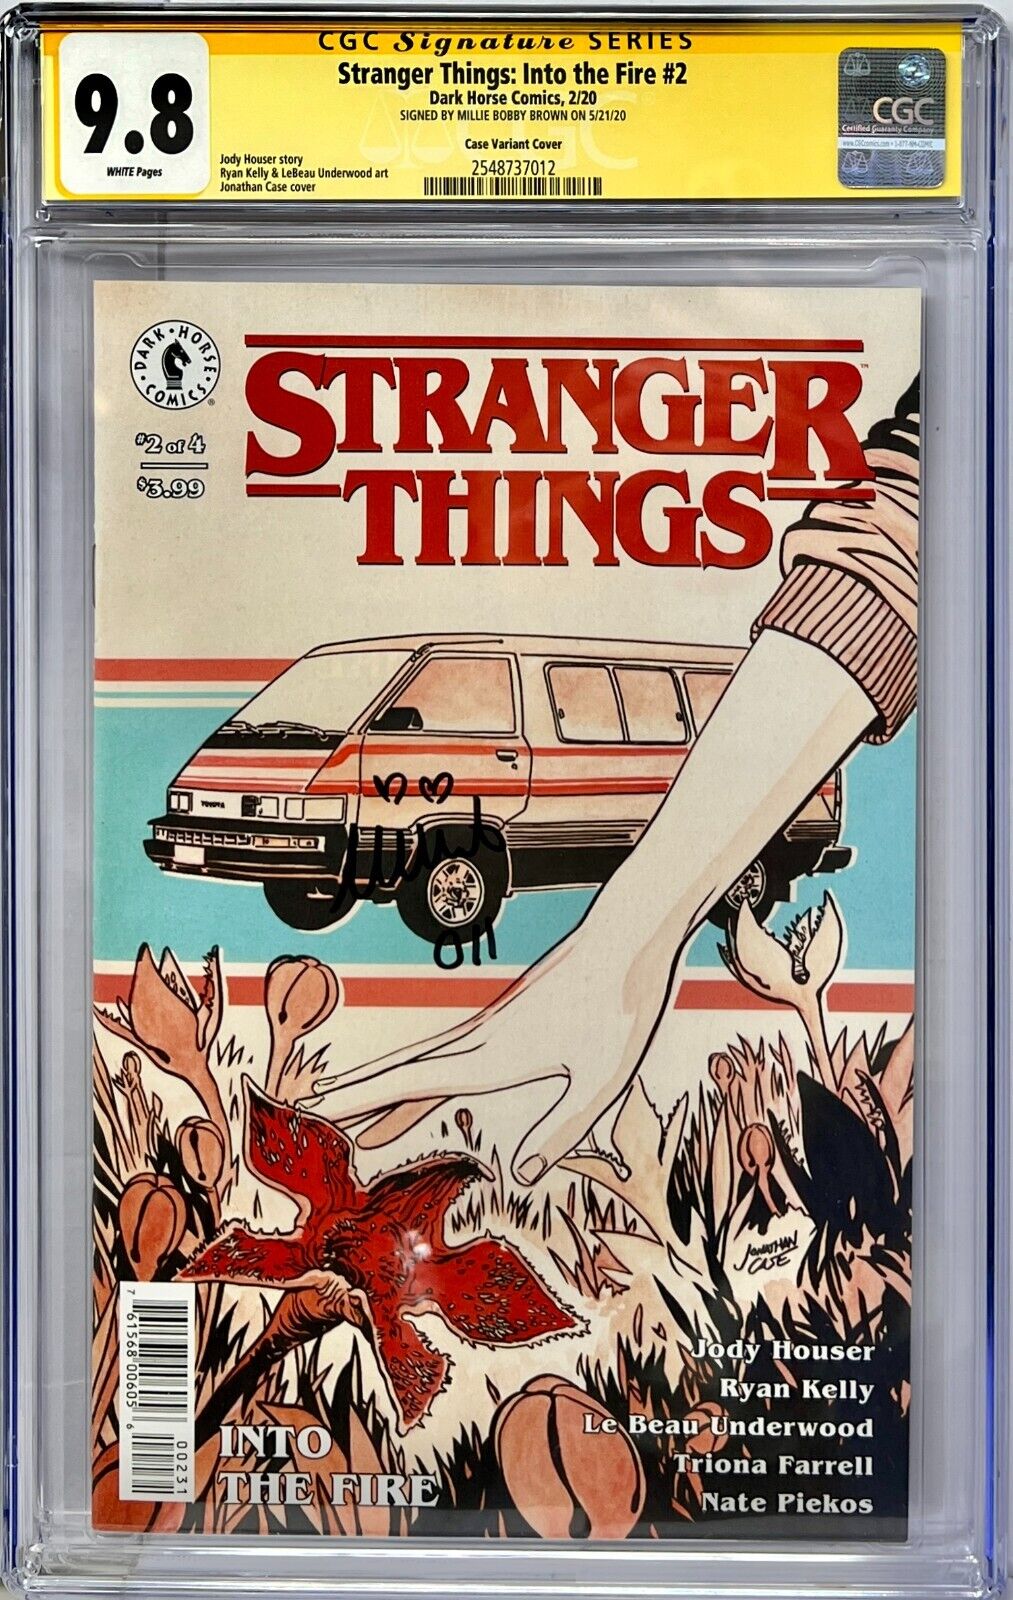 CGC SS 9.8 STRANGER THINGS #2 COMIC SIGNED BY MILLIE BOBBY BROWN DARK HORSE BUS